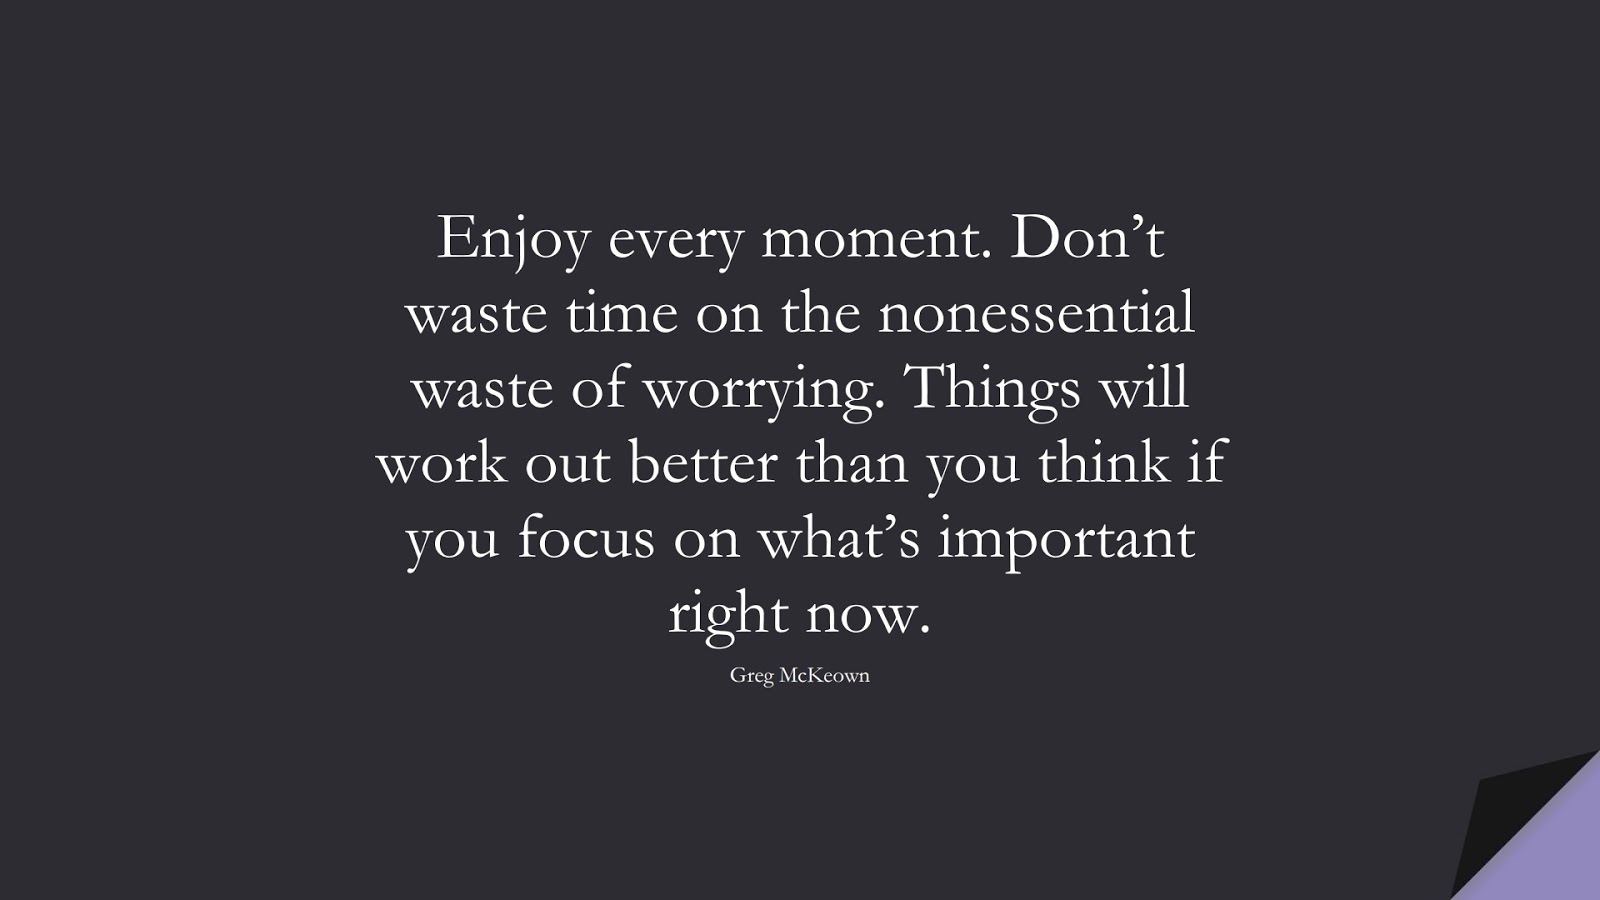 Enjoy every moment. Don’t waste time on the nonessential waste of worrying. Things will work out better than you think if you focus on what’s important right now. (Greg McKeown);  #StressQuotes